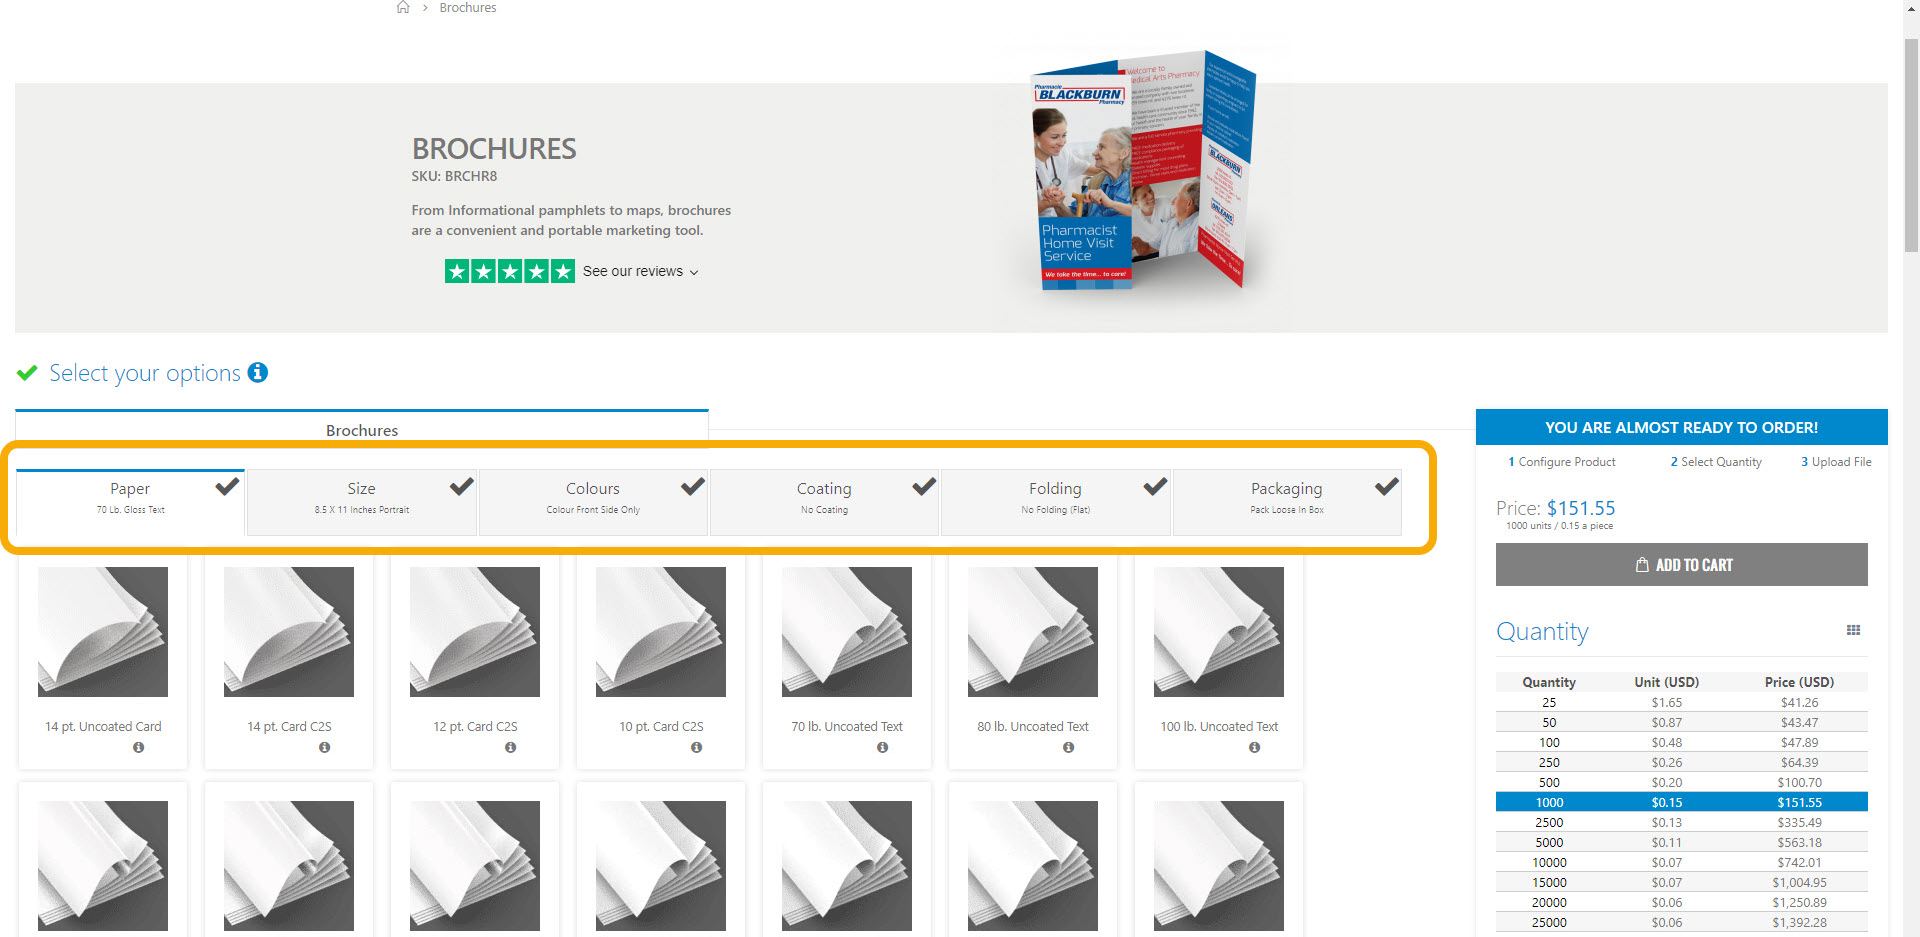 A screen shot of a product page on Newprint's website showing the available product options.